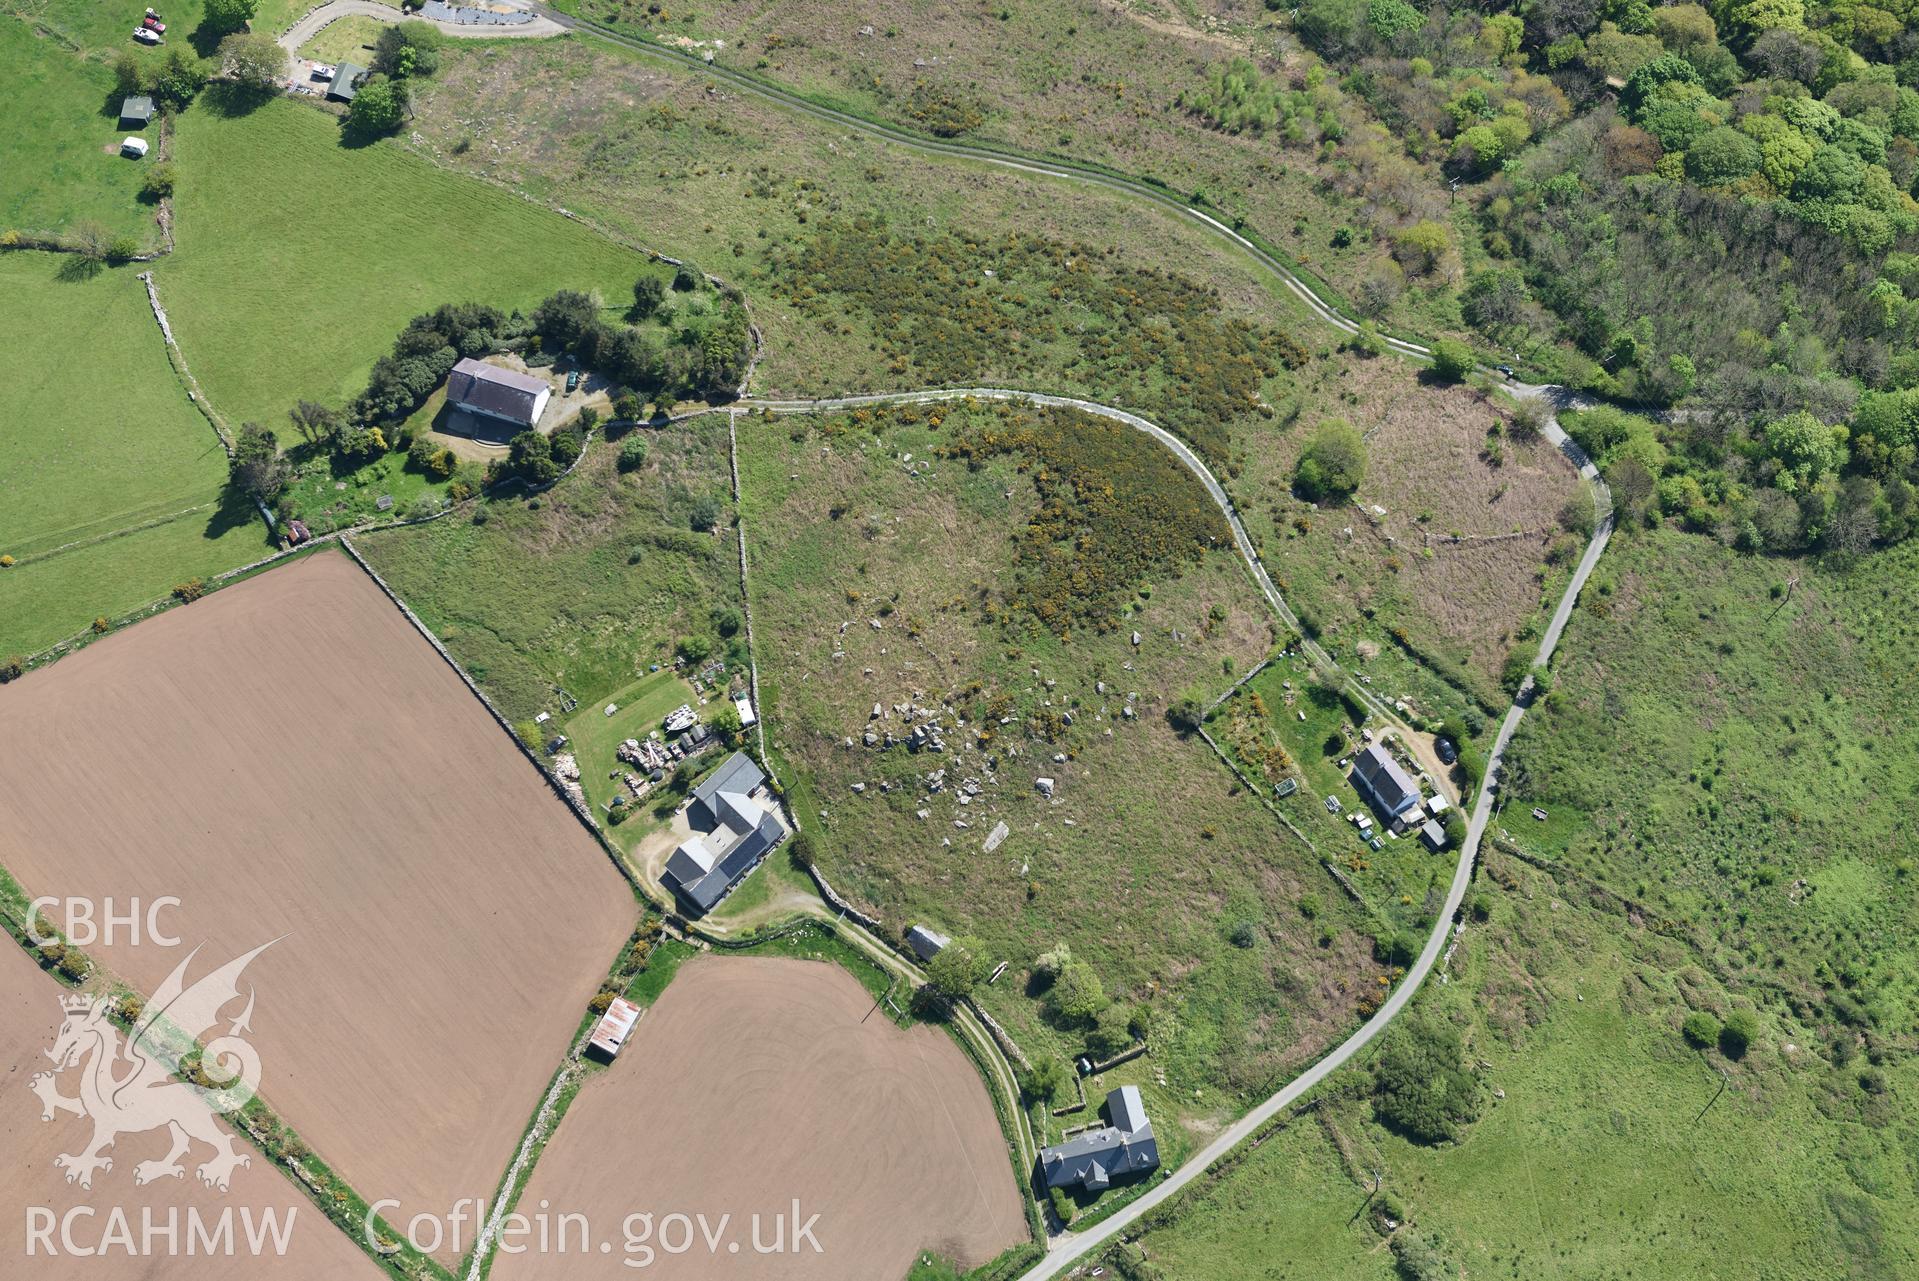 Aerial photography of Ty'n y Graig taken on 3rd May 2017.  Baseline aerial reconnaissance survey for the CHERISH Project. ? Crown: CHERISH PROJECT 2017. Produced with EU funds through the Ireland Wales Co-operation Programme 2014-2020. All material made freely available through the Open Government Licence.